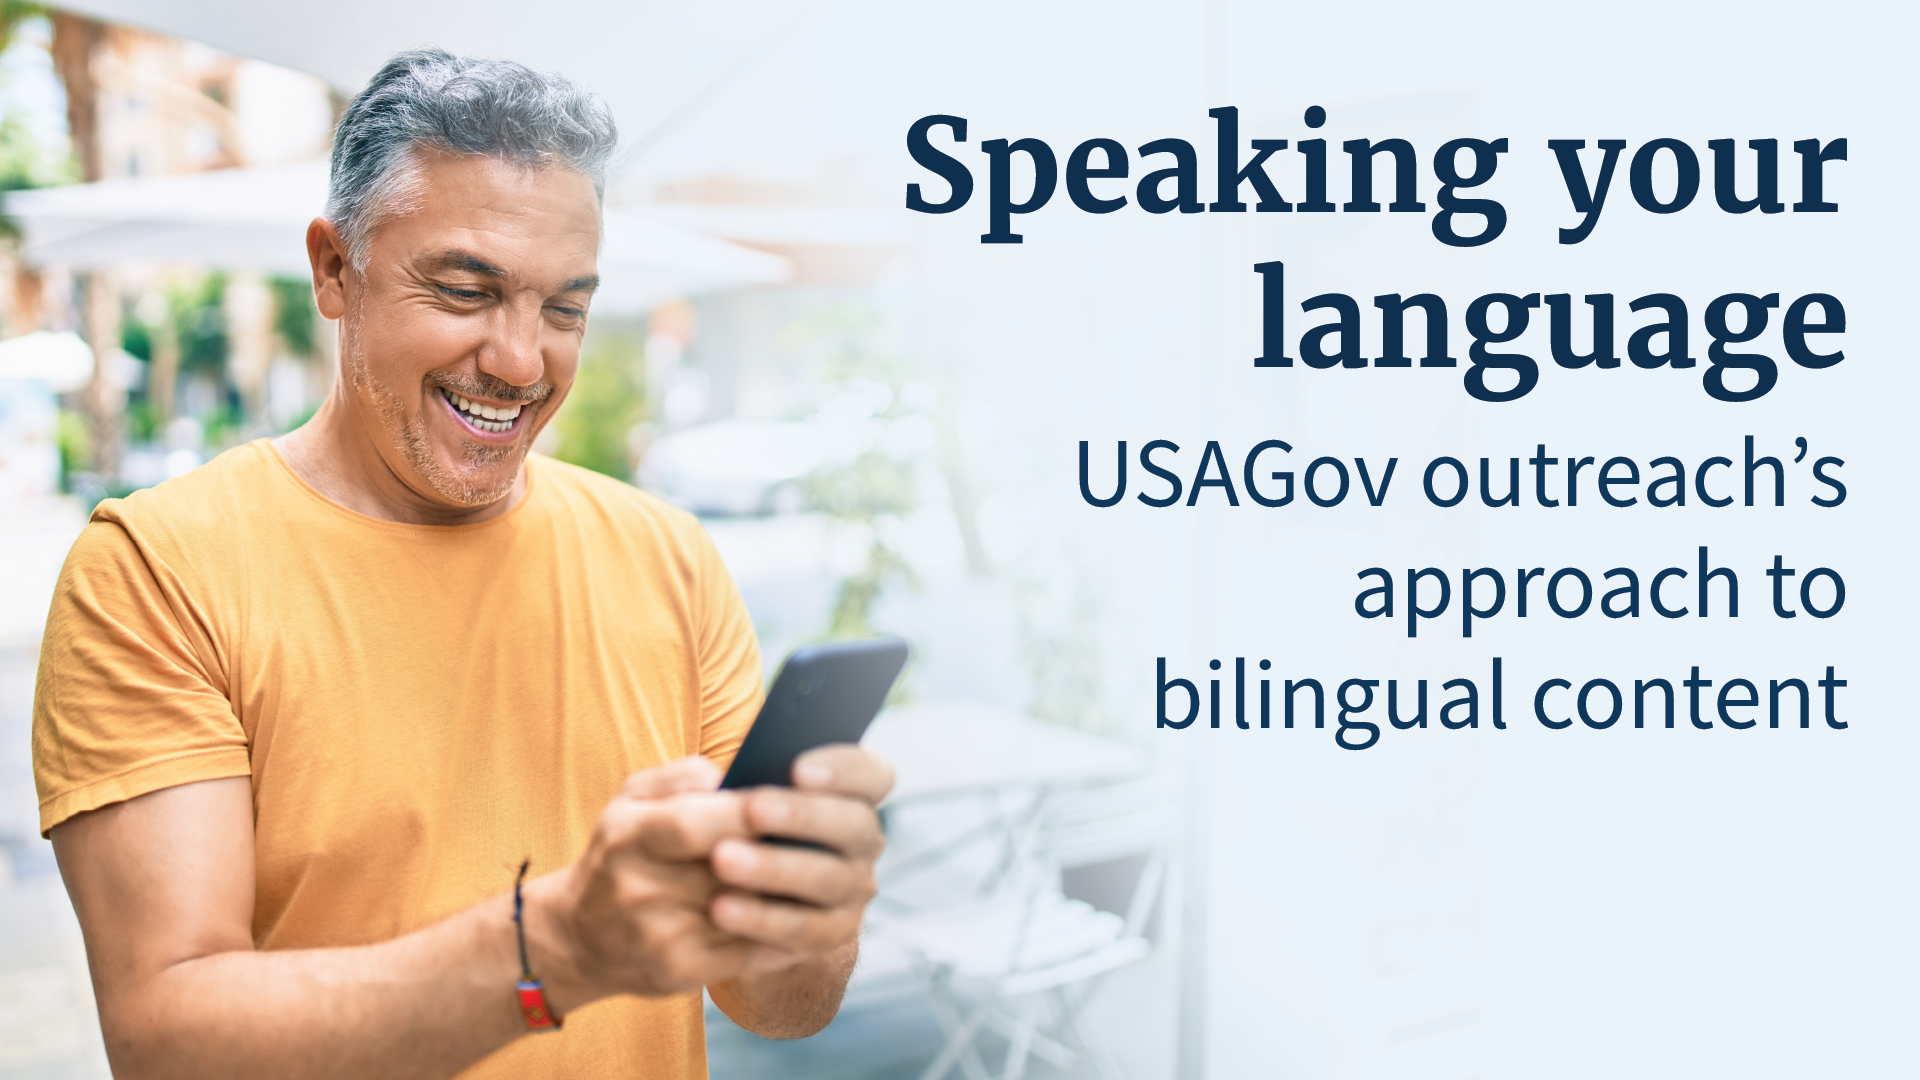 Person on smiling looking at phone. Text: Speaking your language: USAGov outreach’s approach to bilingual content